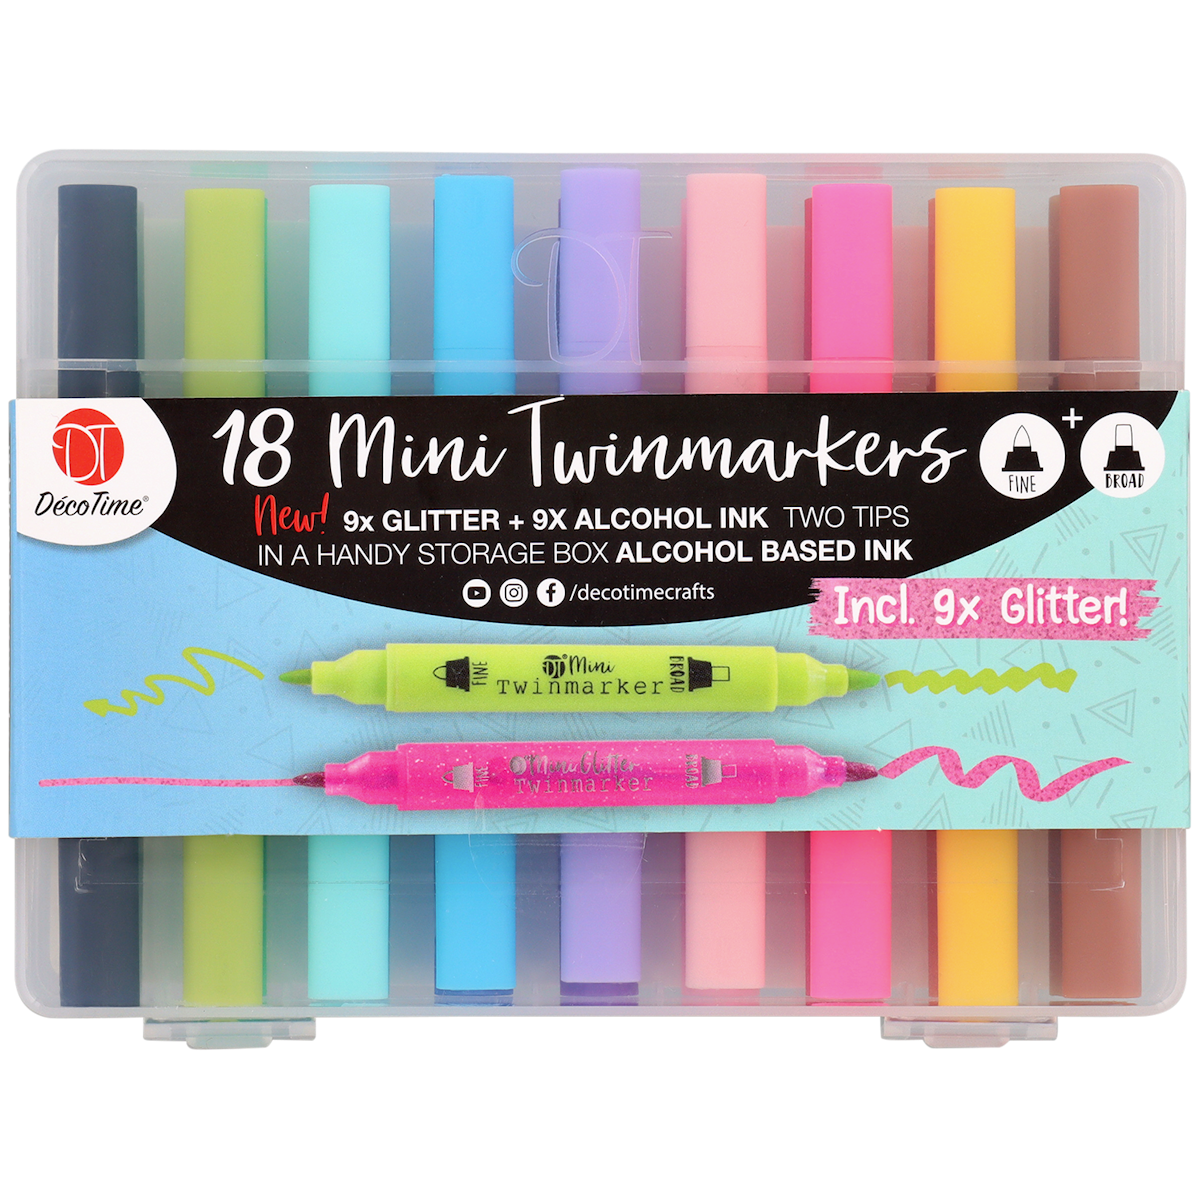 DécoTime mini-twinmarkers